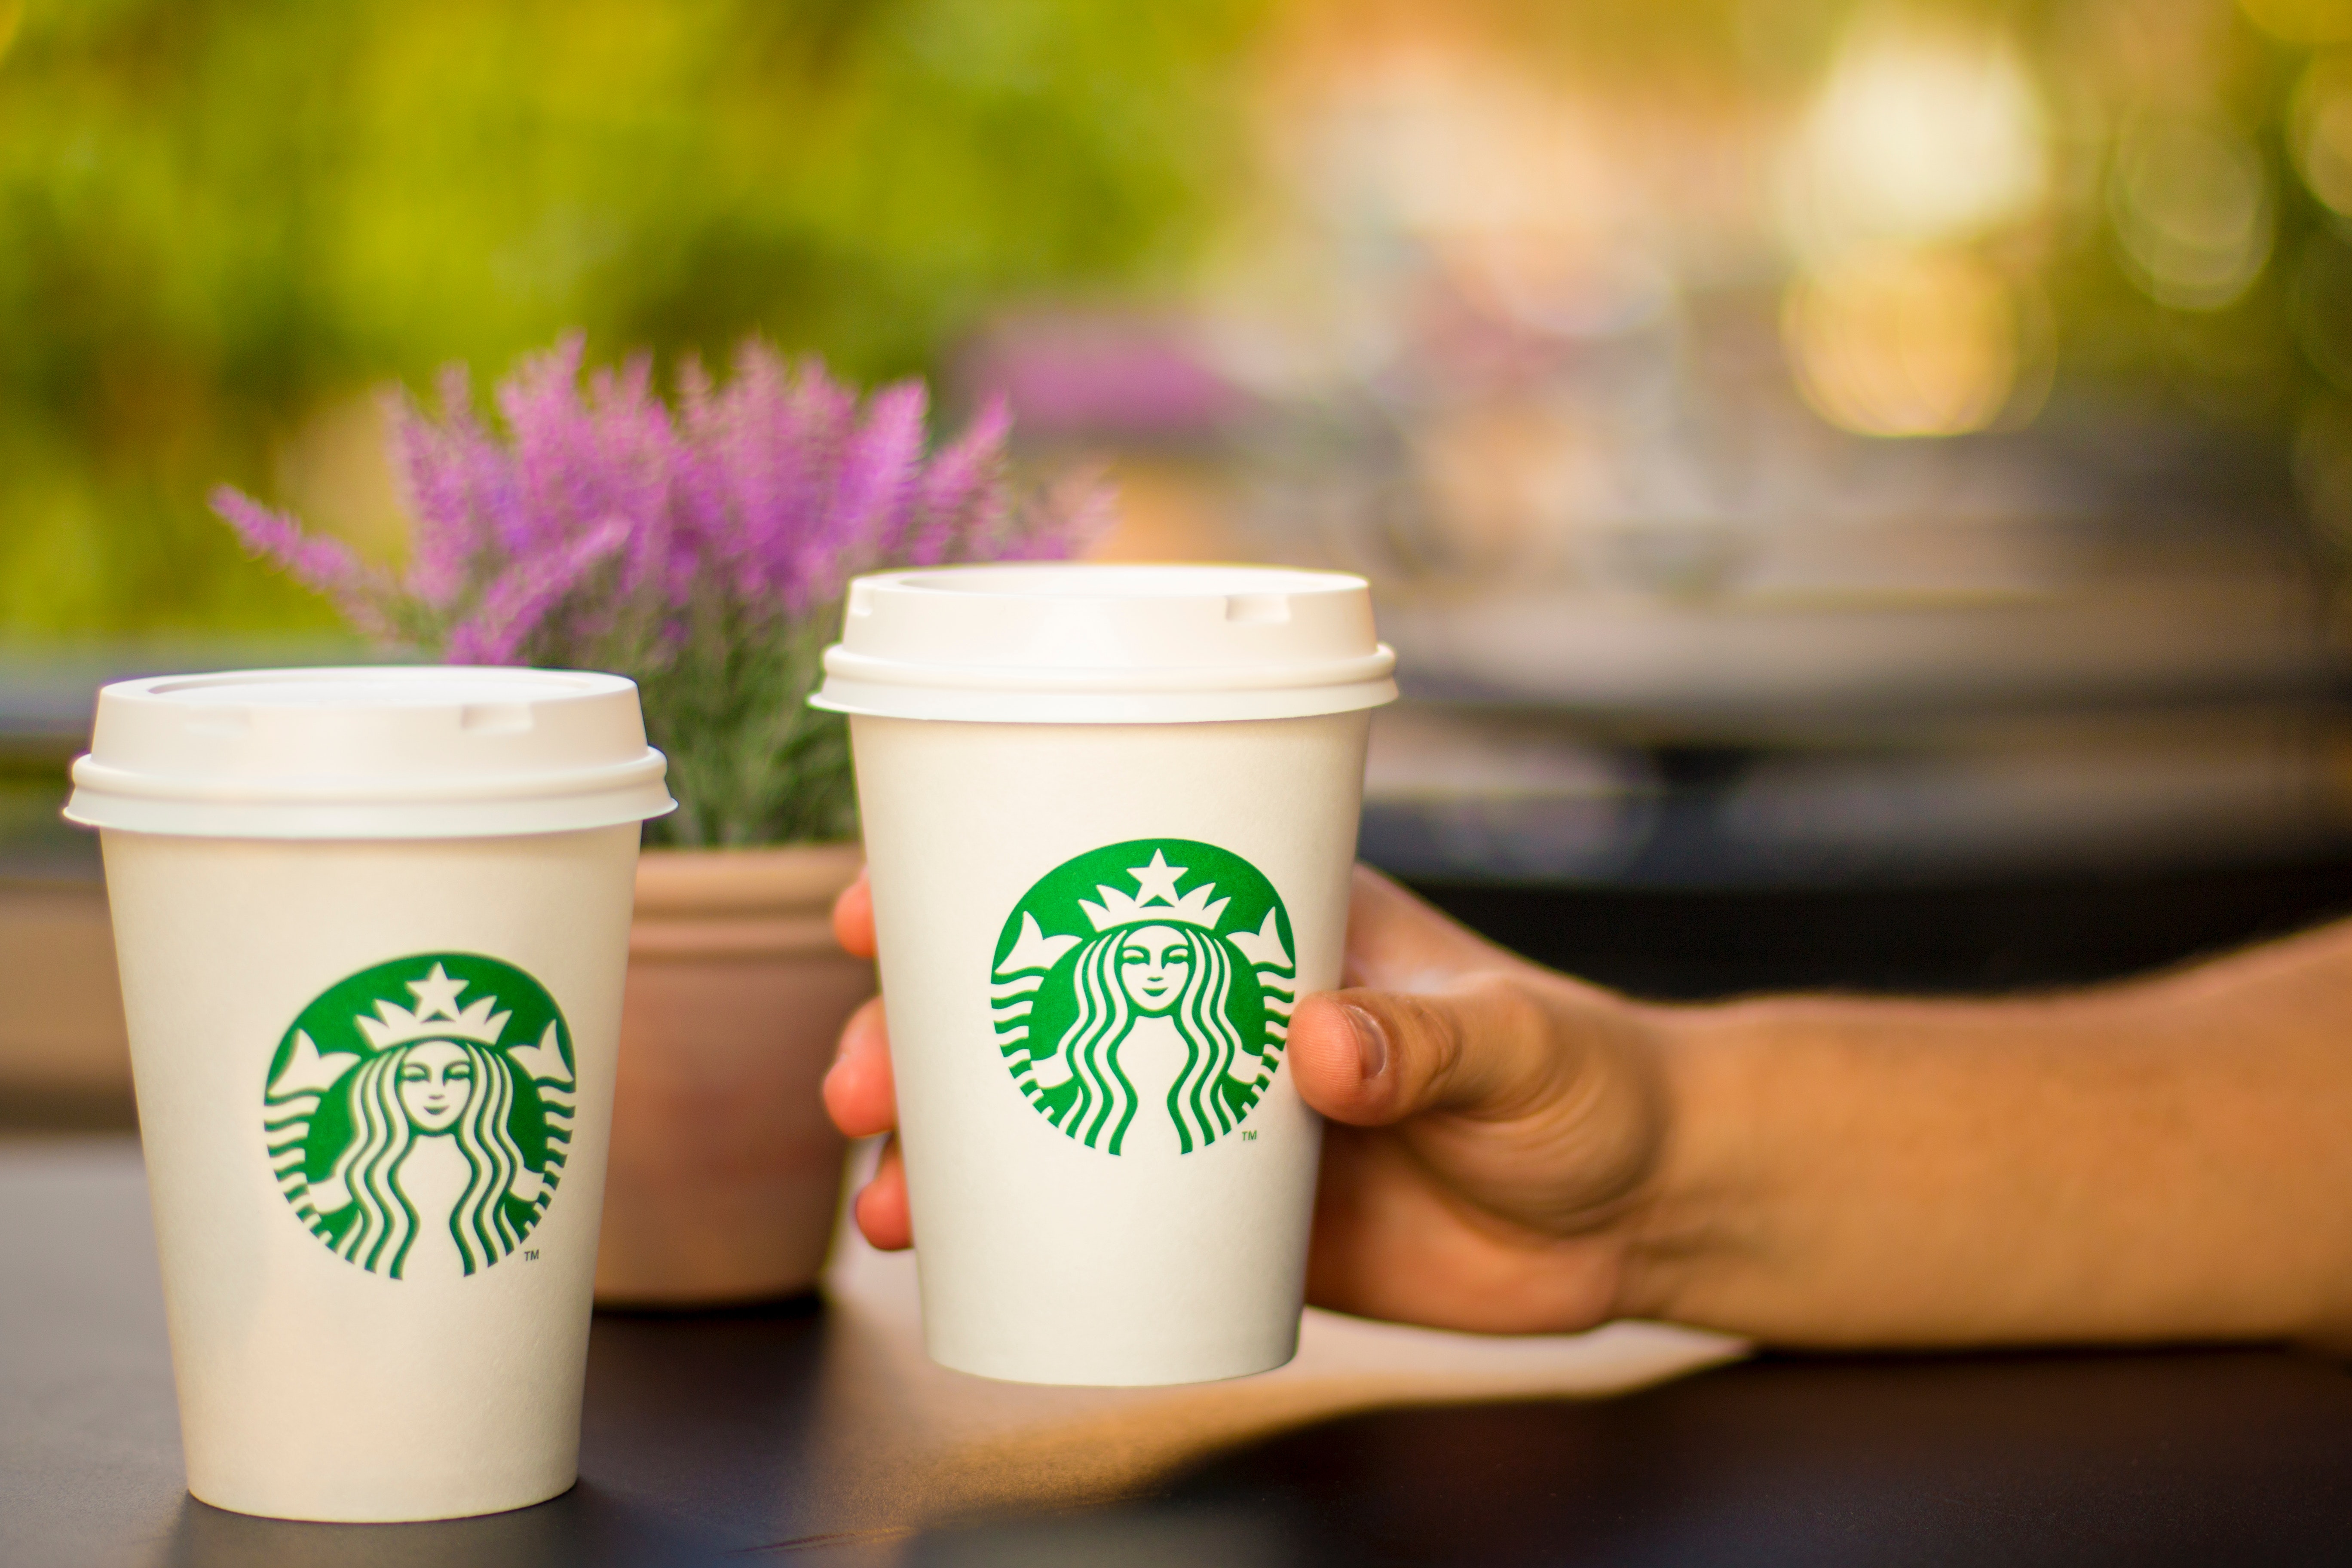 Get a Free $10 Starbucks Gift Card!